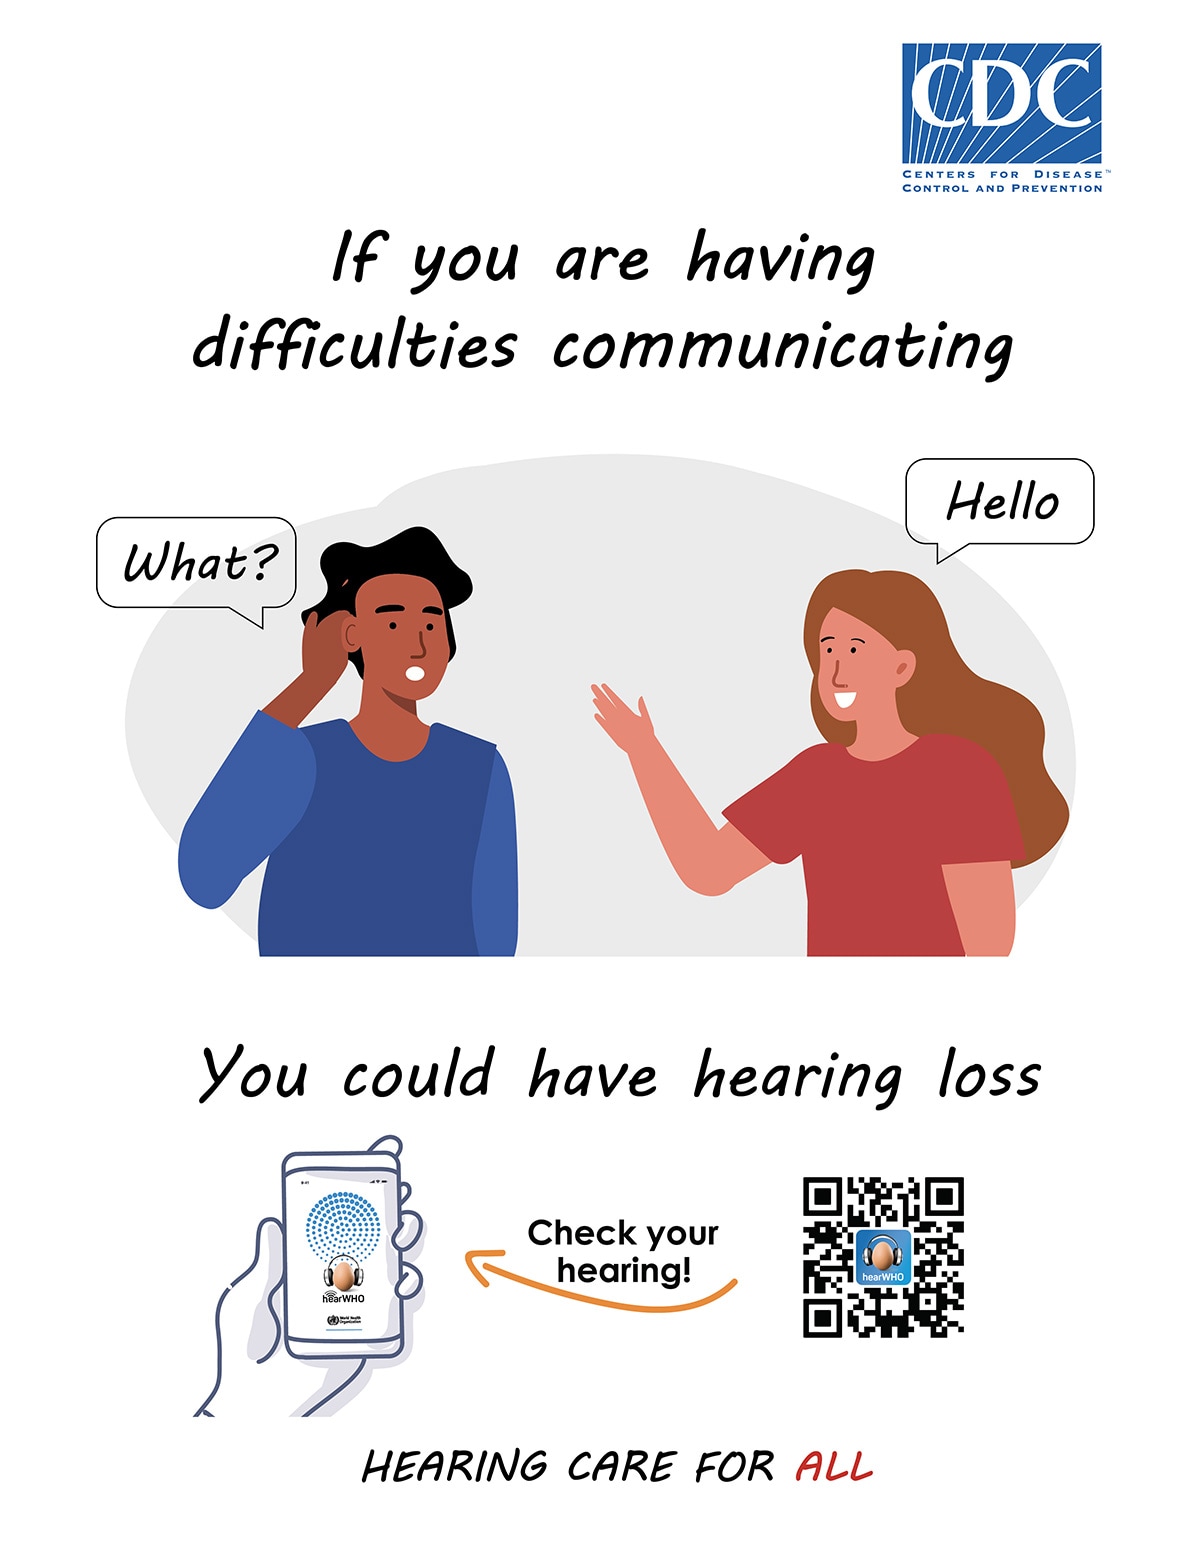 If you are having difficulties communicating, you could have hearing loss. Check your hearing!